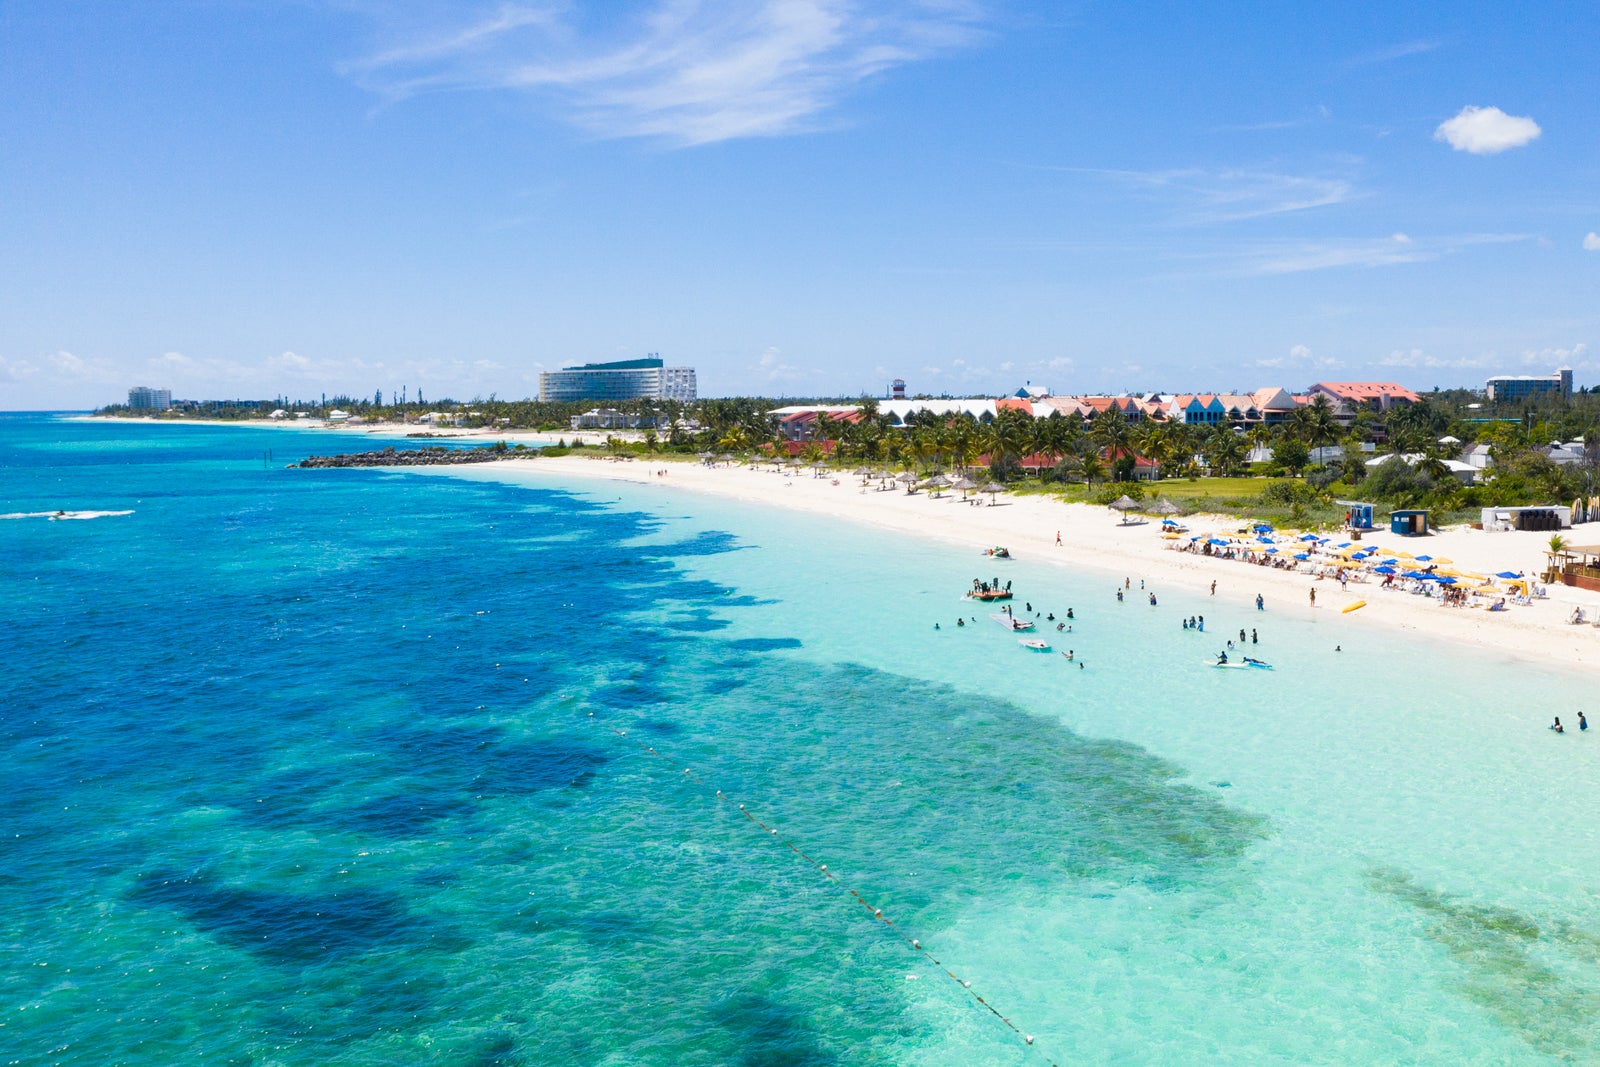 Sunshine sale: Fly to the Caribbean from $226 round-trip